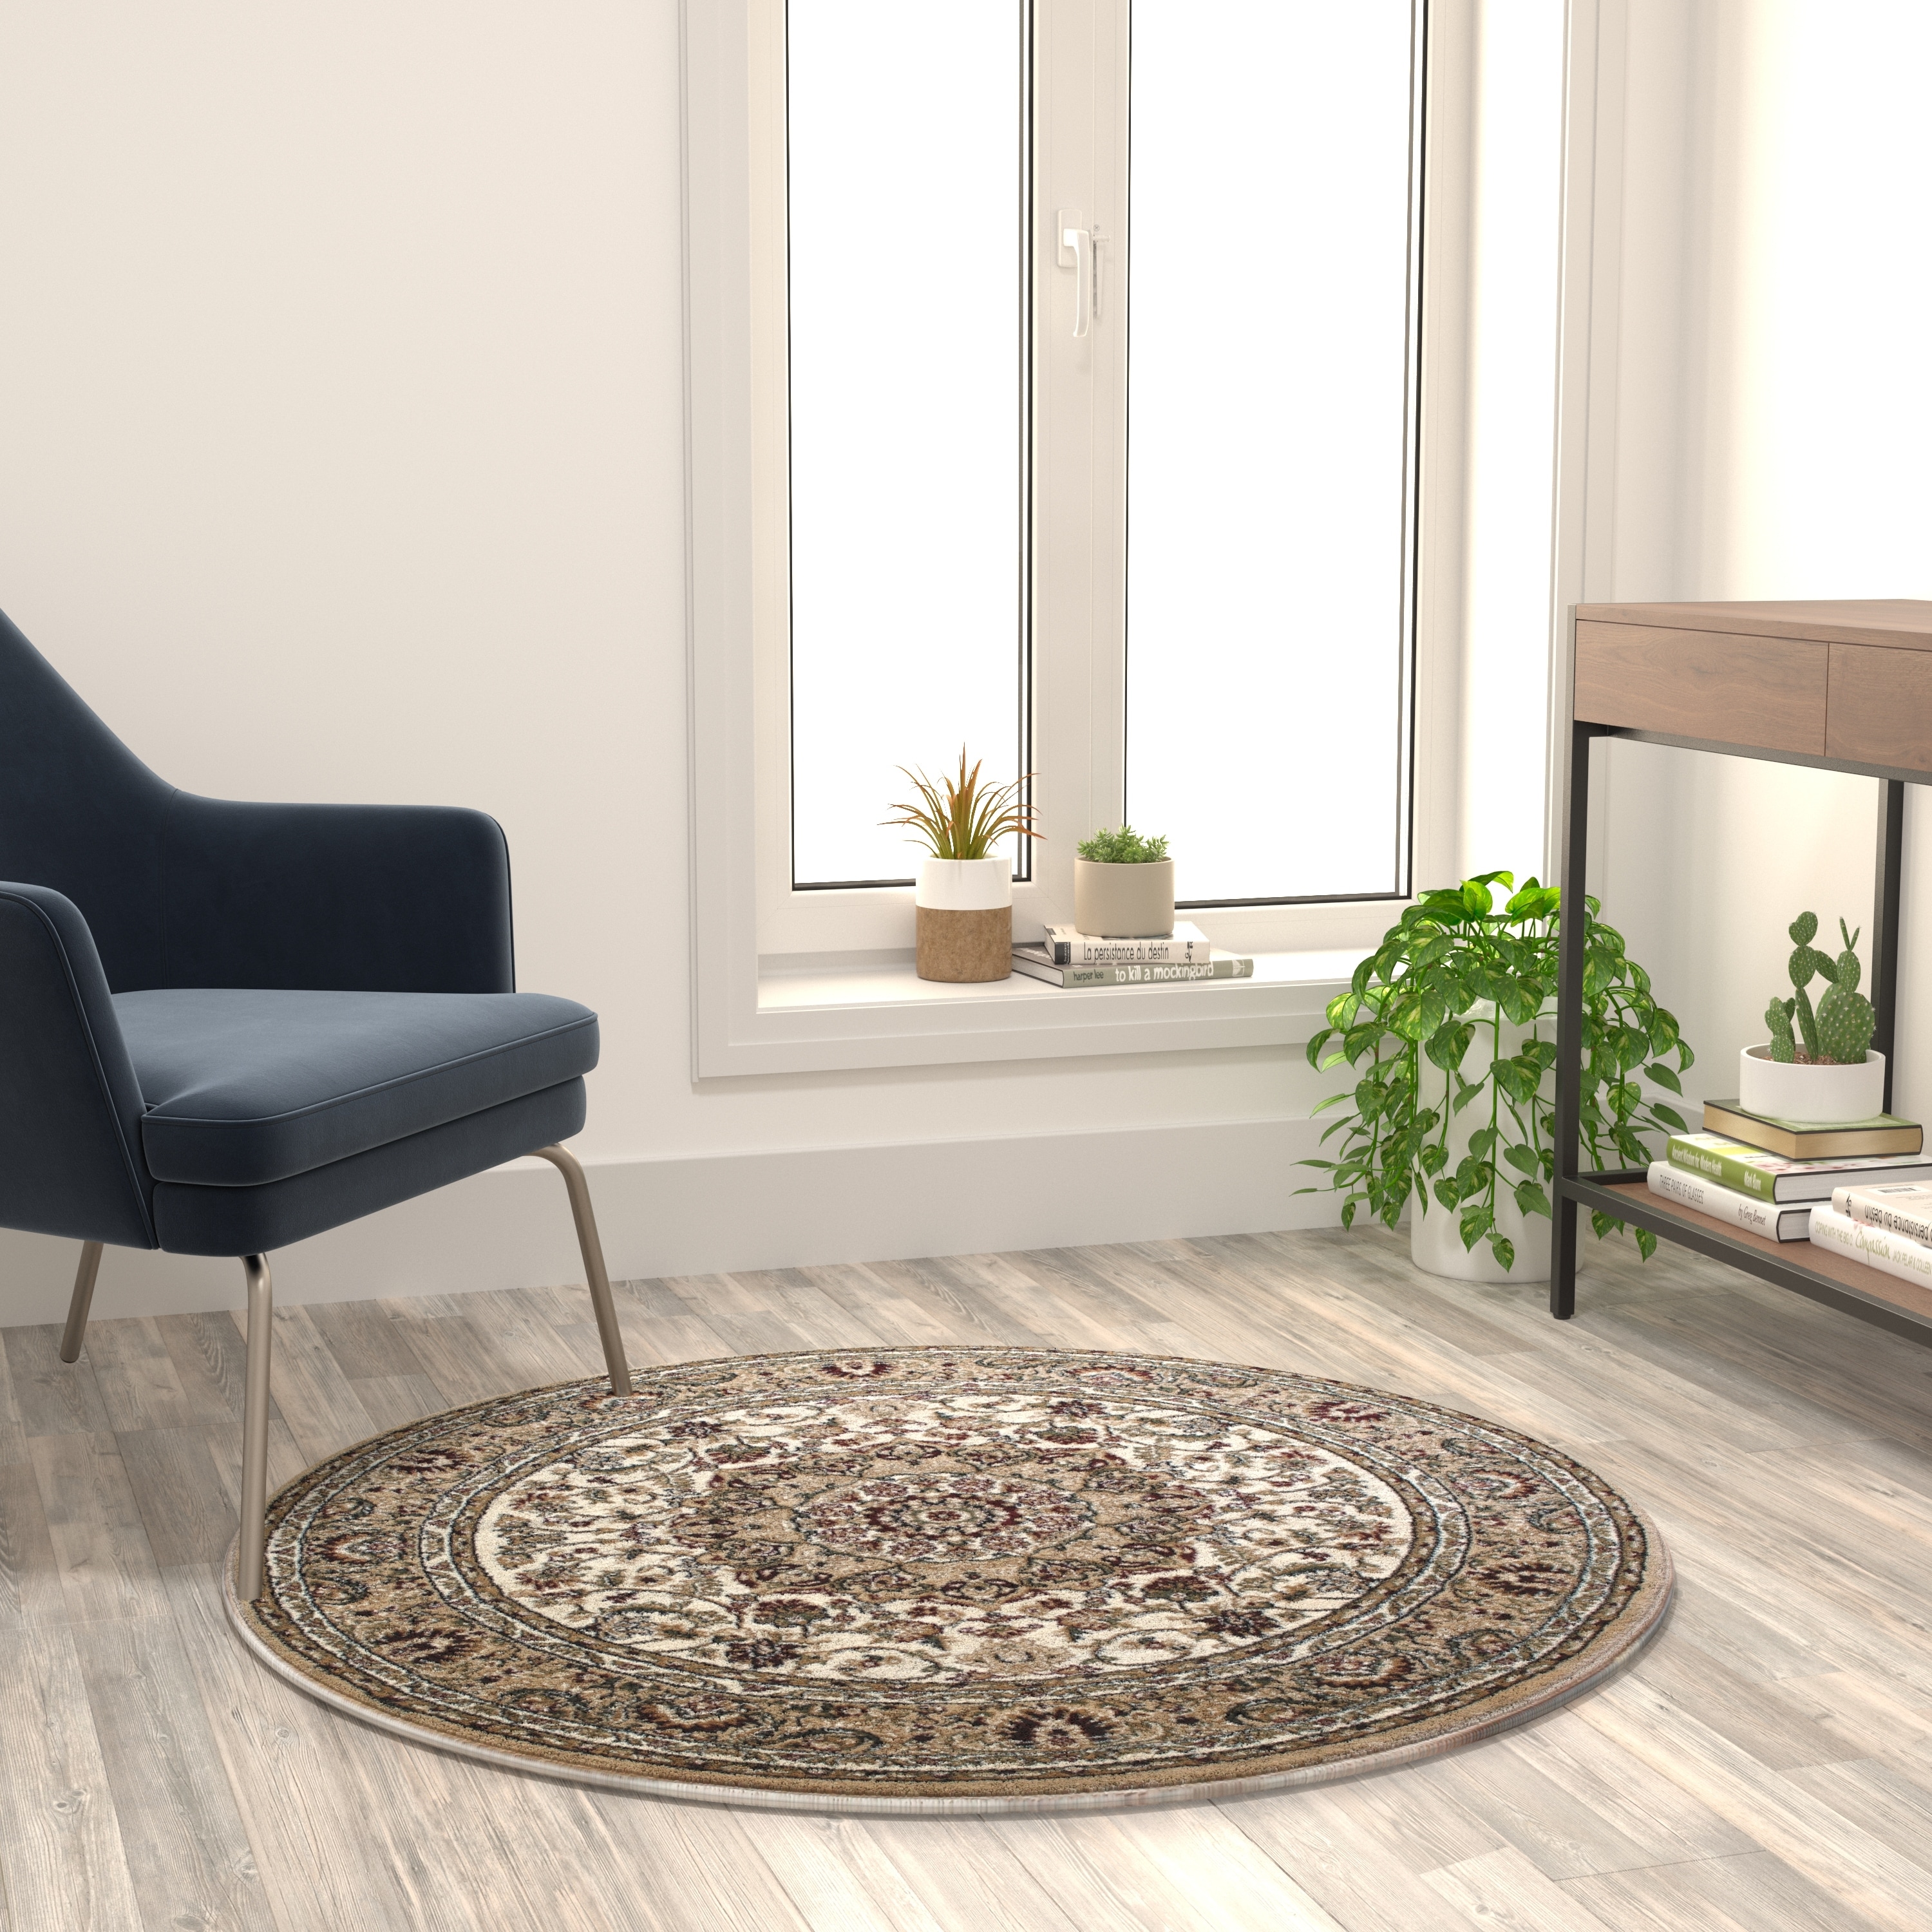 https://ak1.ostkcdn.com/images/products/is/images/direct/4d3e8352143fe5e363a1ded5e1a52a6022a1f53e/Multipurpose-Persian-Style-Olefin-Medallion-Motif-Area-Rug.jpg